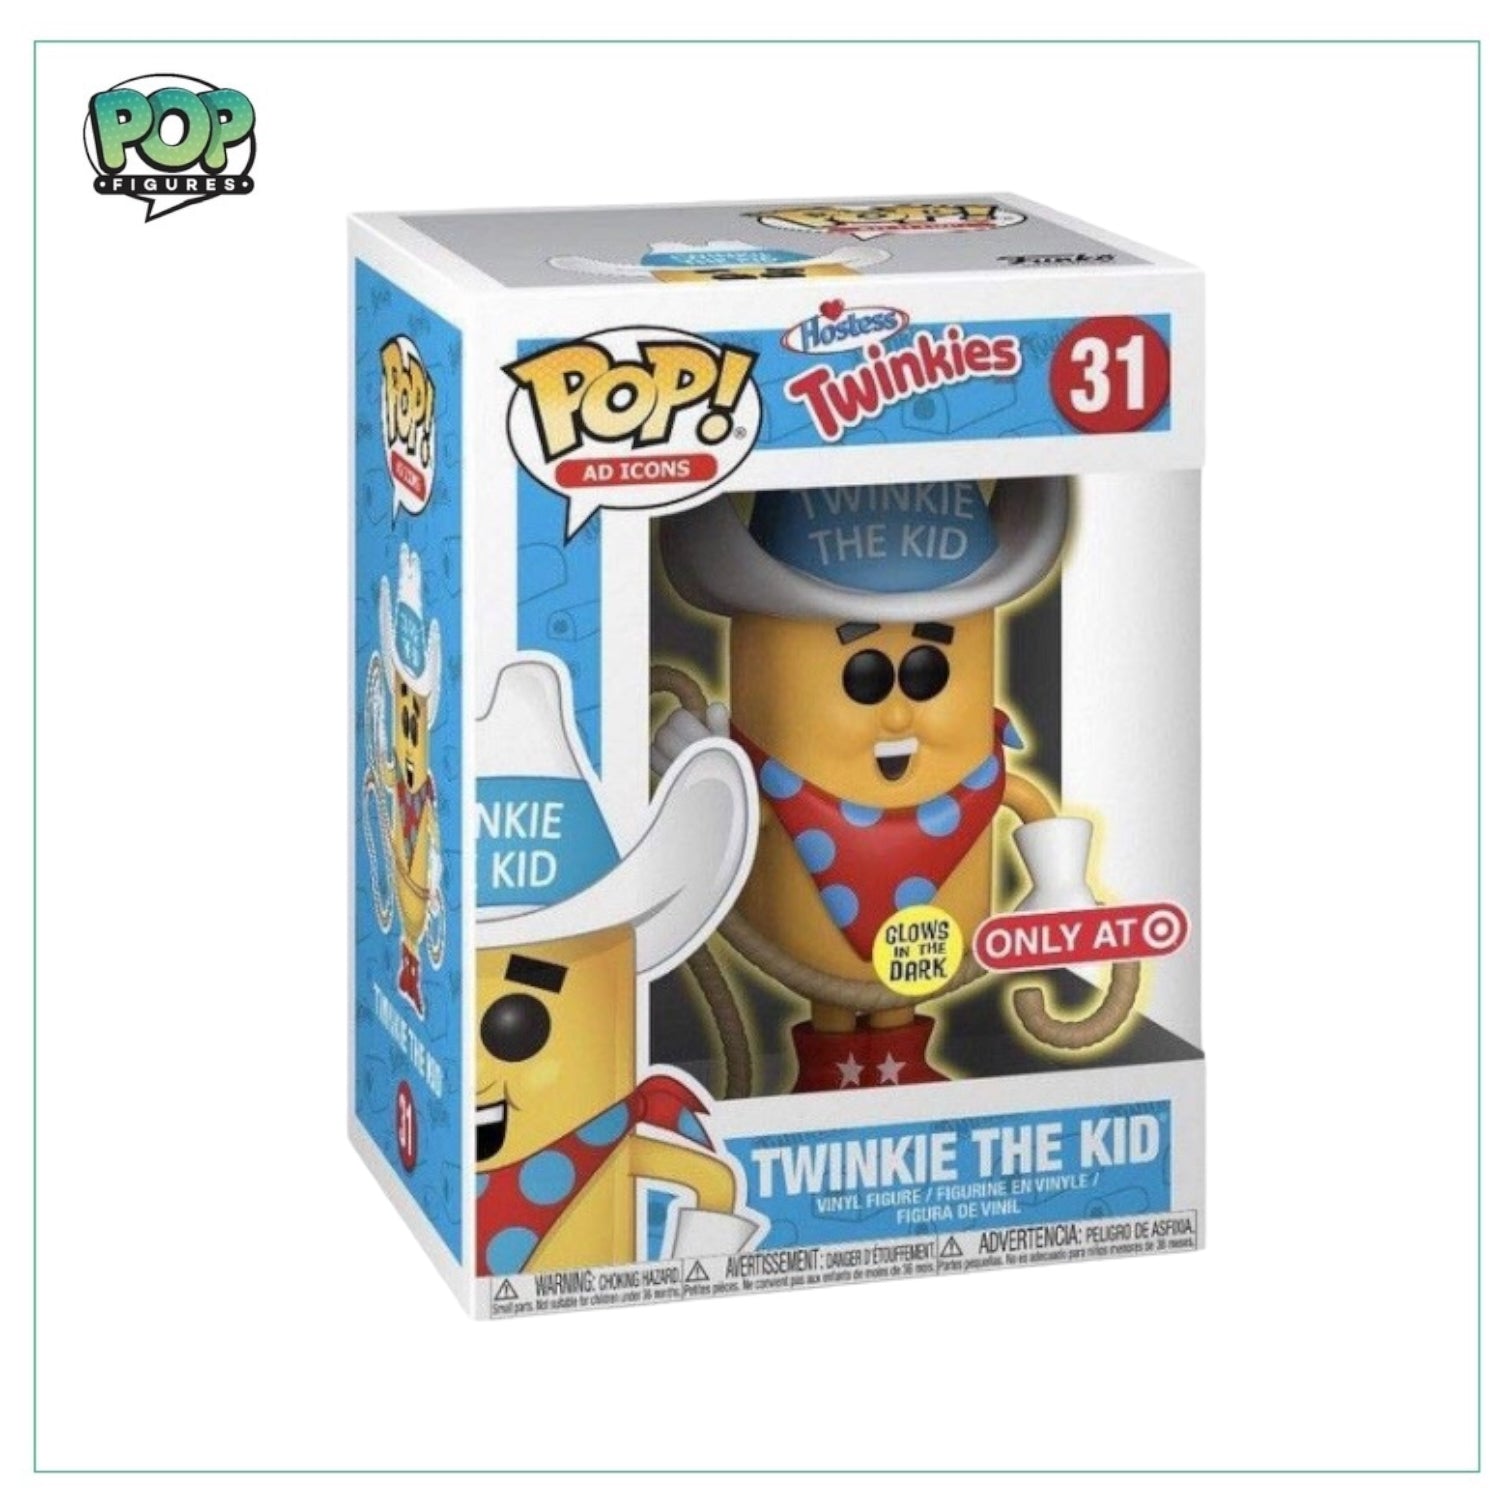 Twinkie The Kid #31 (glow in the dark) Funko Pop! - Hostess Twinkies - Only At Target - Angry Cat